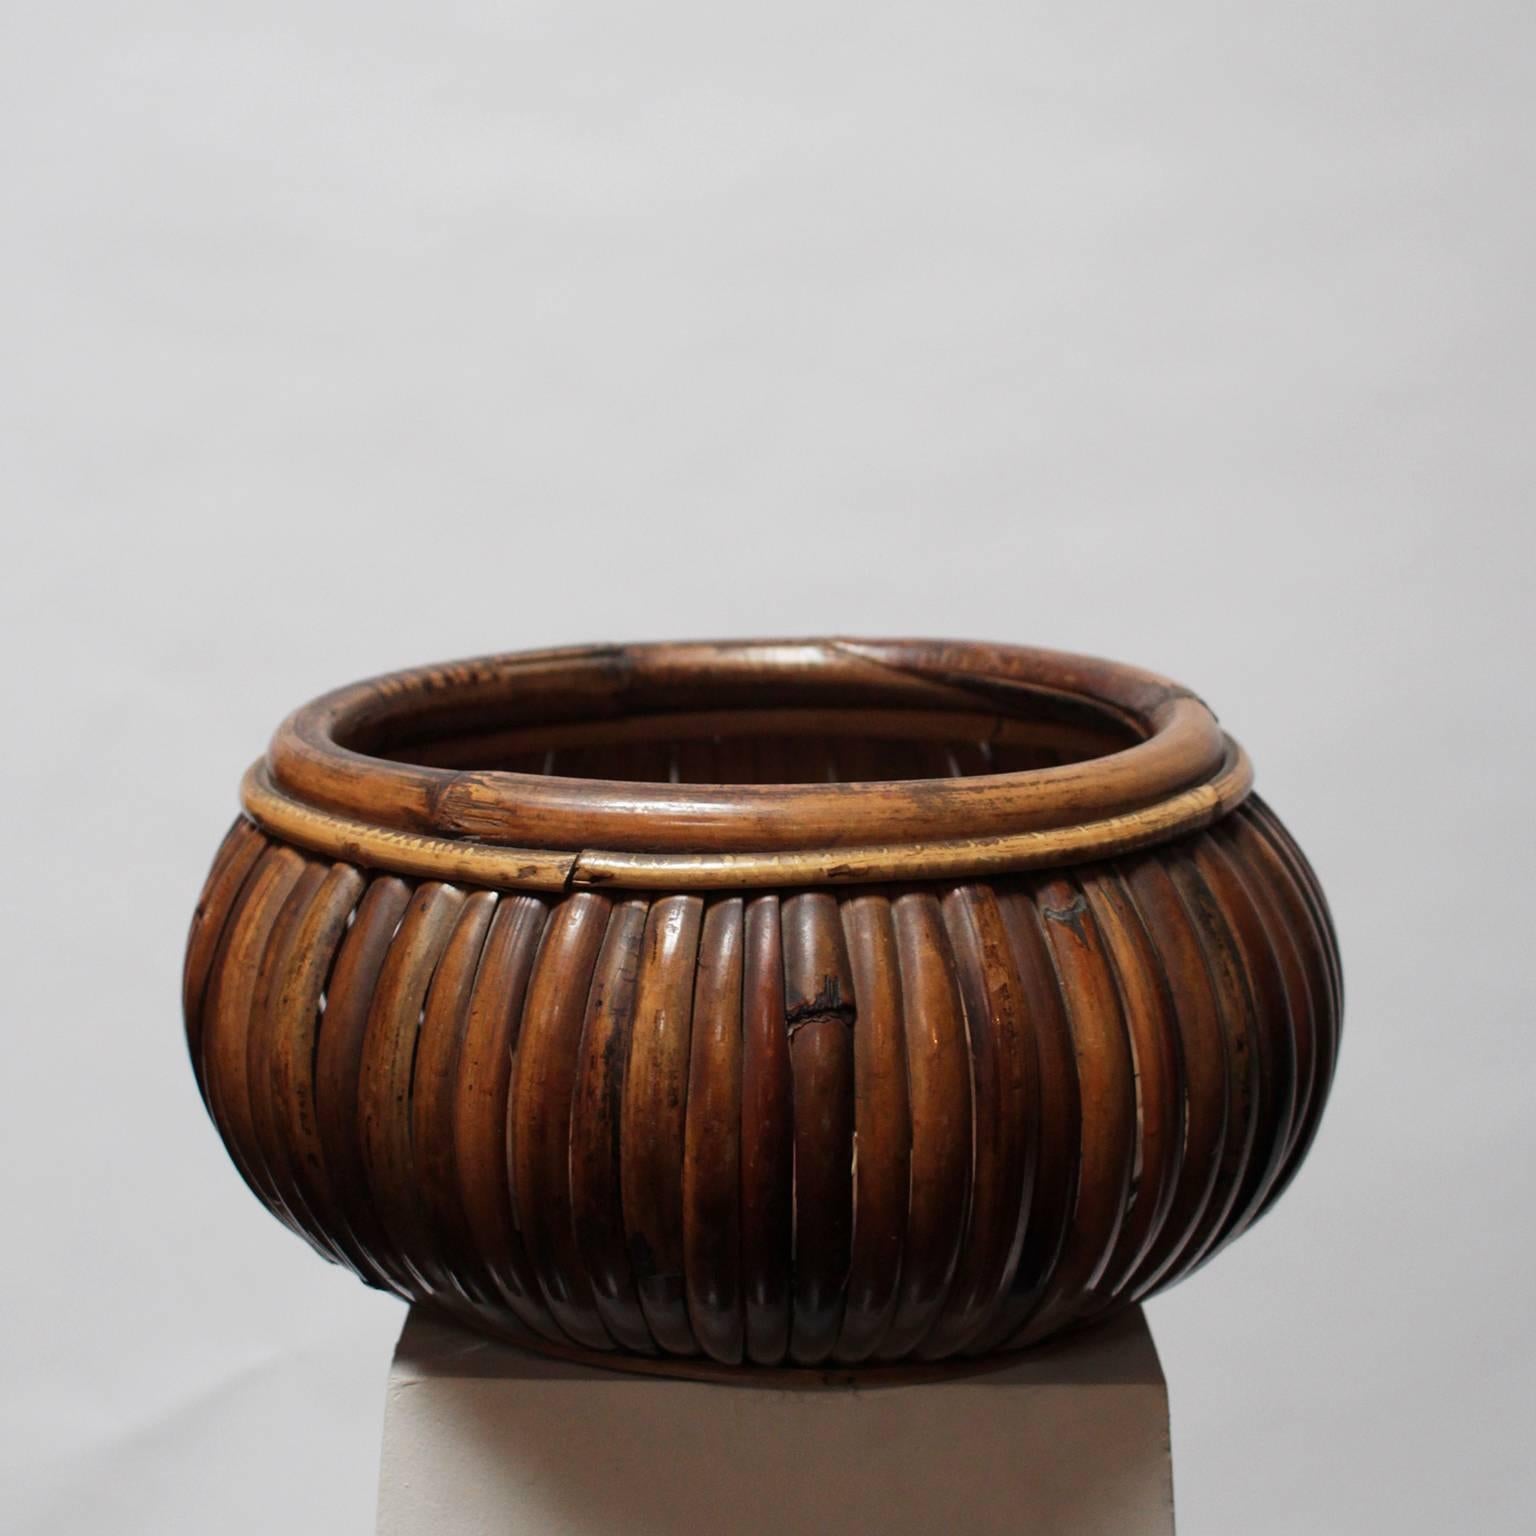 Large bowl in curved bamboo by Gabriella Crespi.

Part of the 